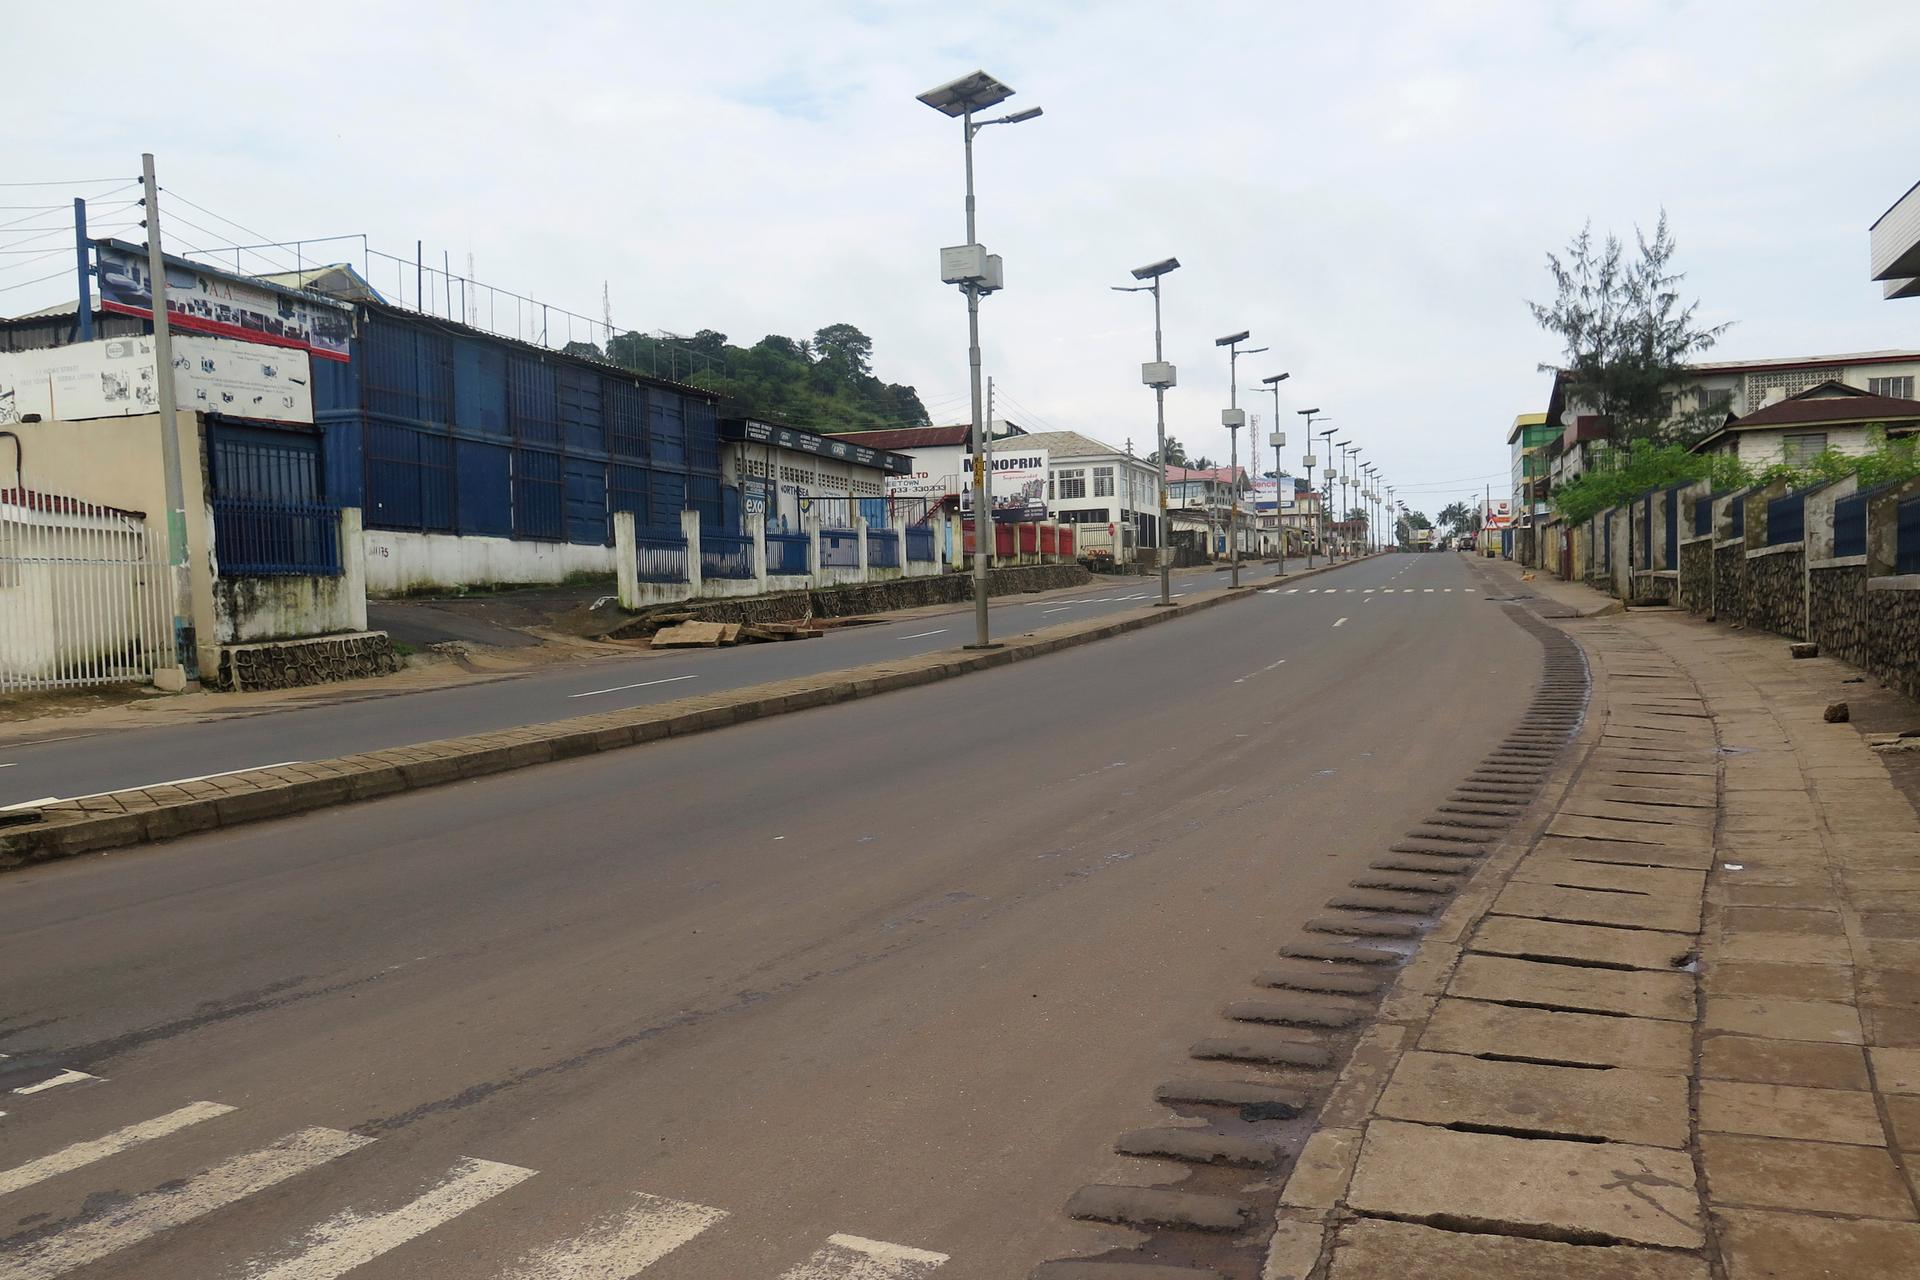 An empty street at the start of a three-day national lockdown in Freetown, Sierra Leone, on September 19, 2014. Curfews were imposed in an effort to halt the spread of the Ebola virus.